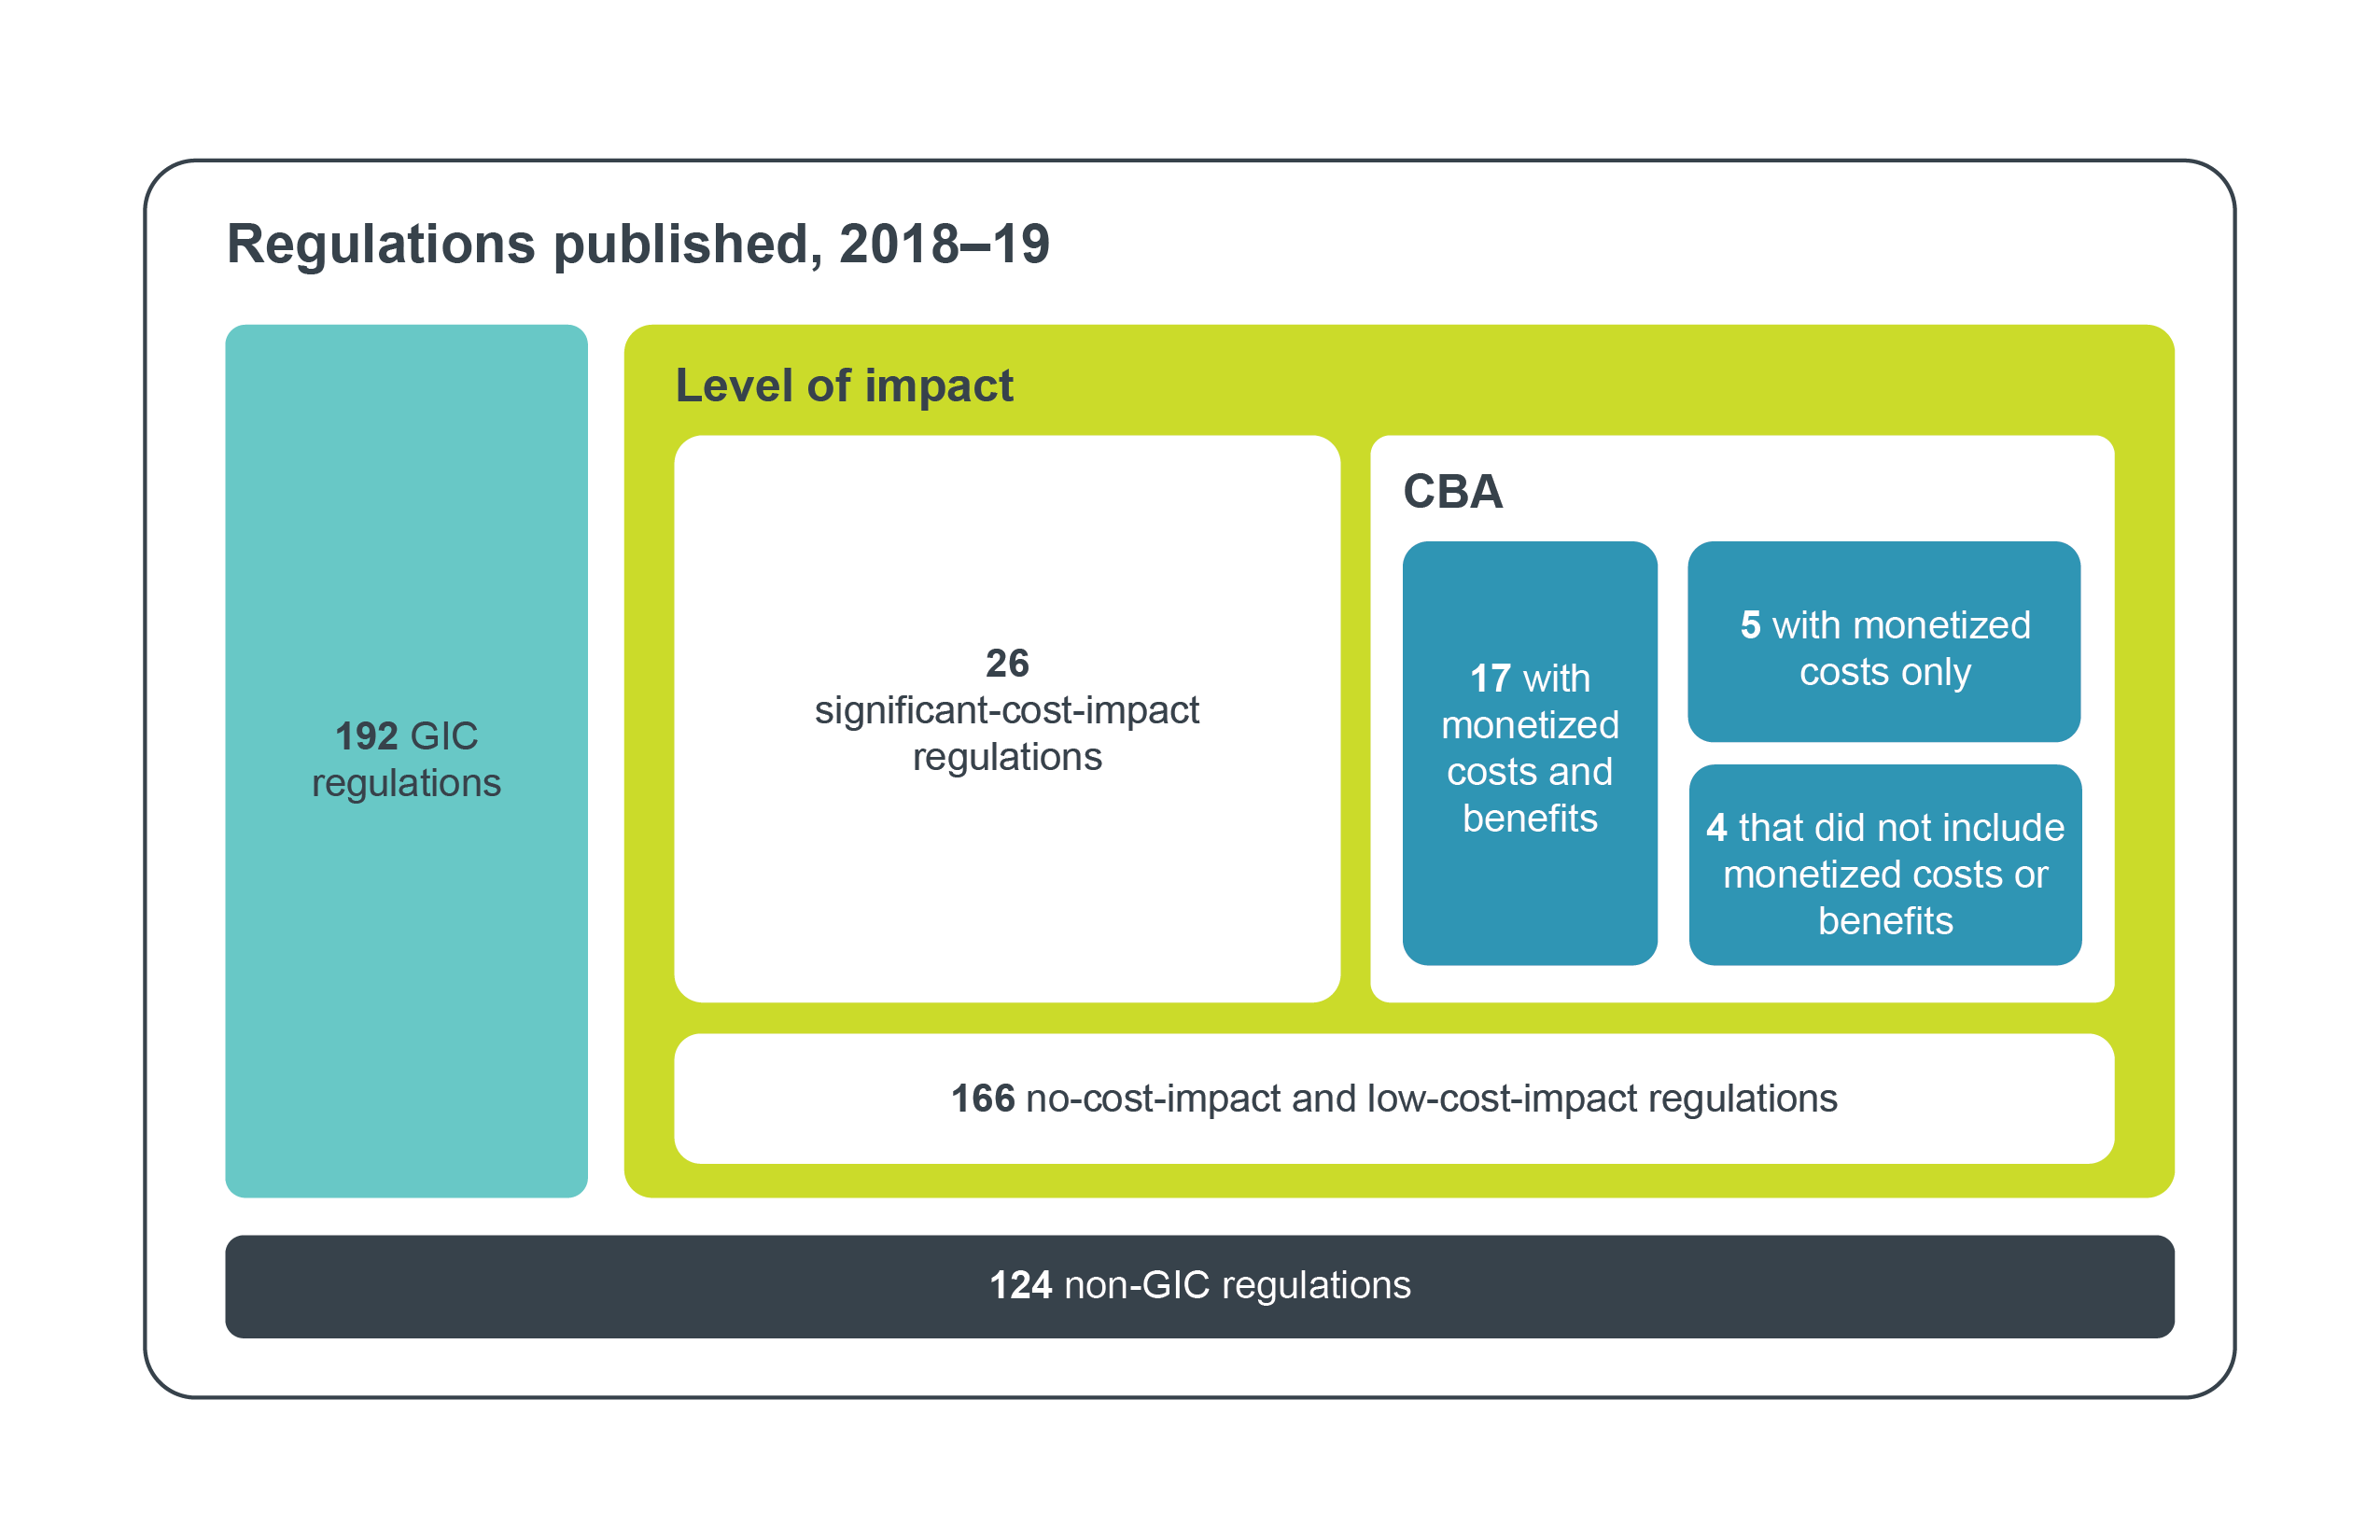 overview of regulations approved and published in 2018–19